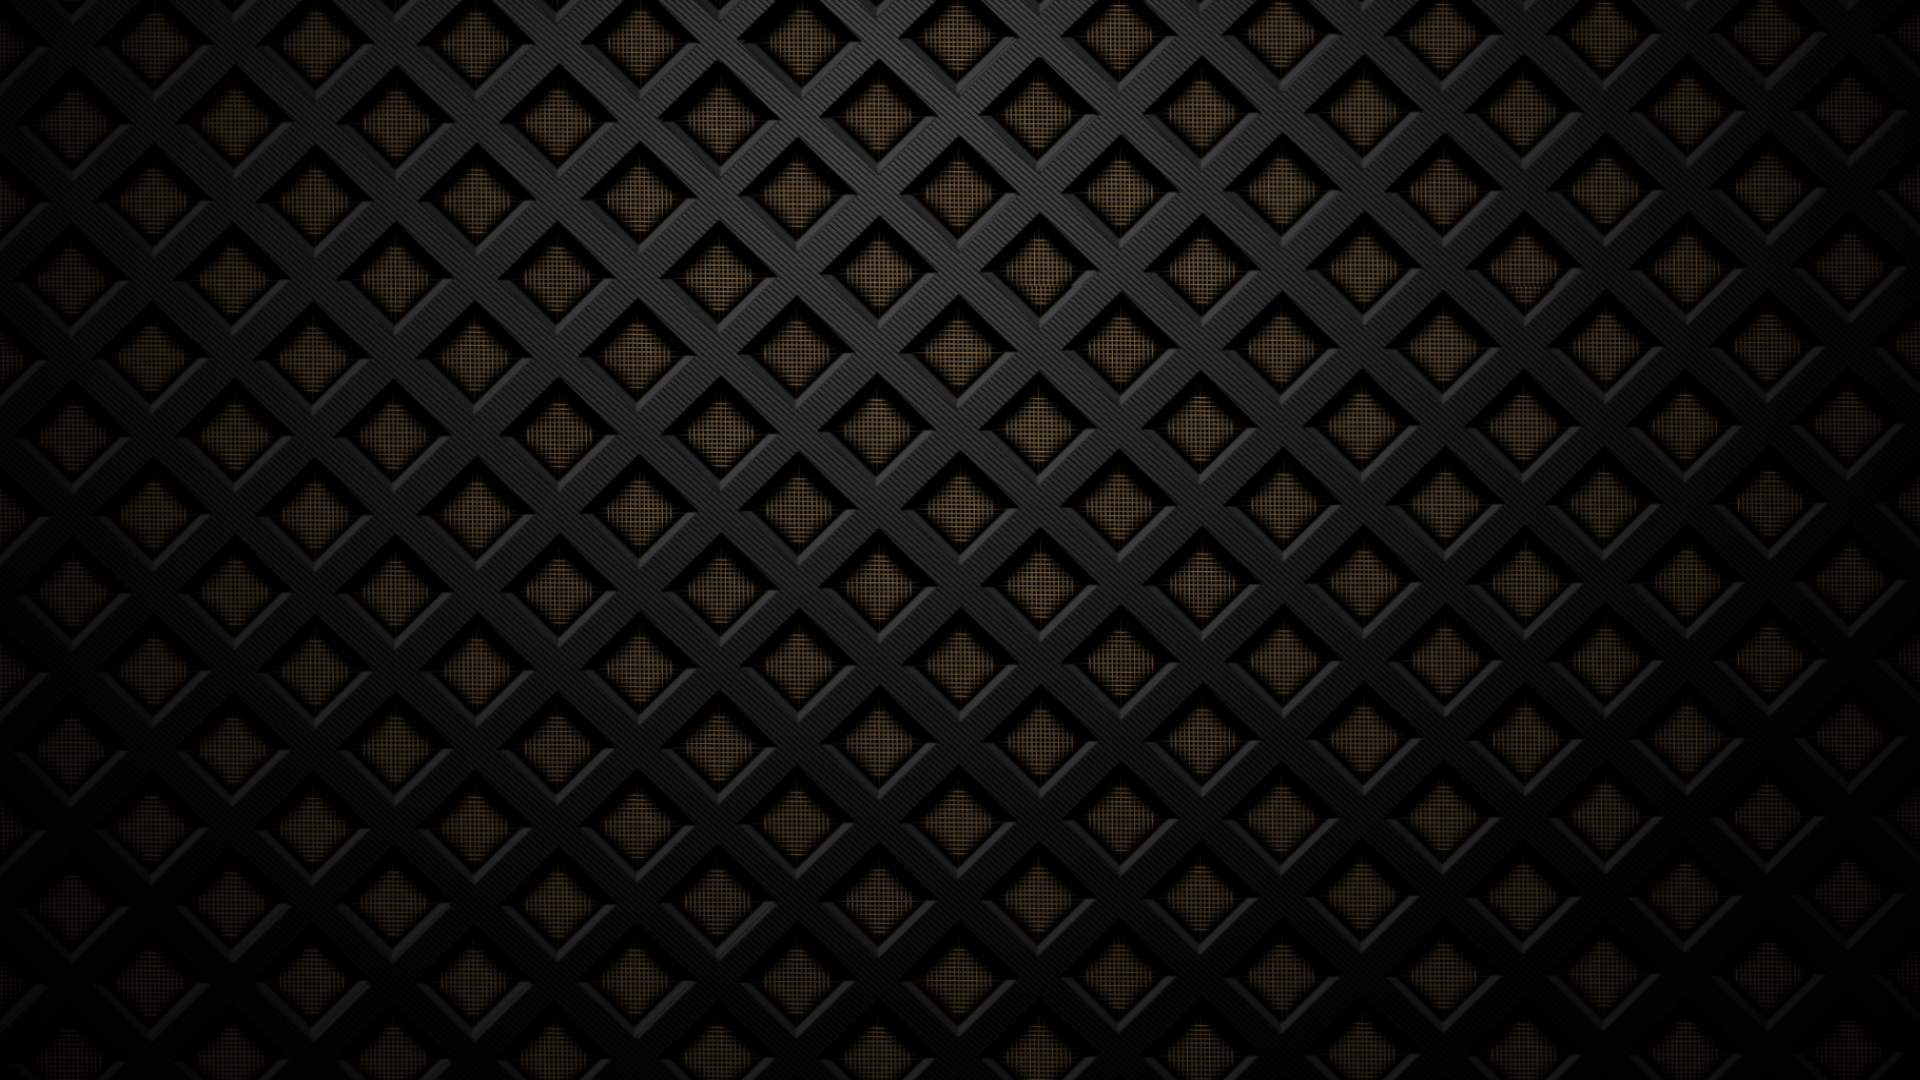 Super HD textured and patterned wallpaper for your mobile devices